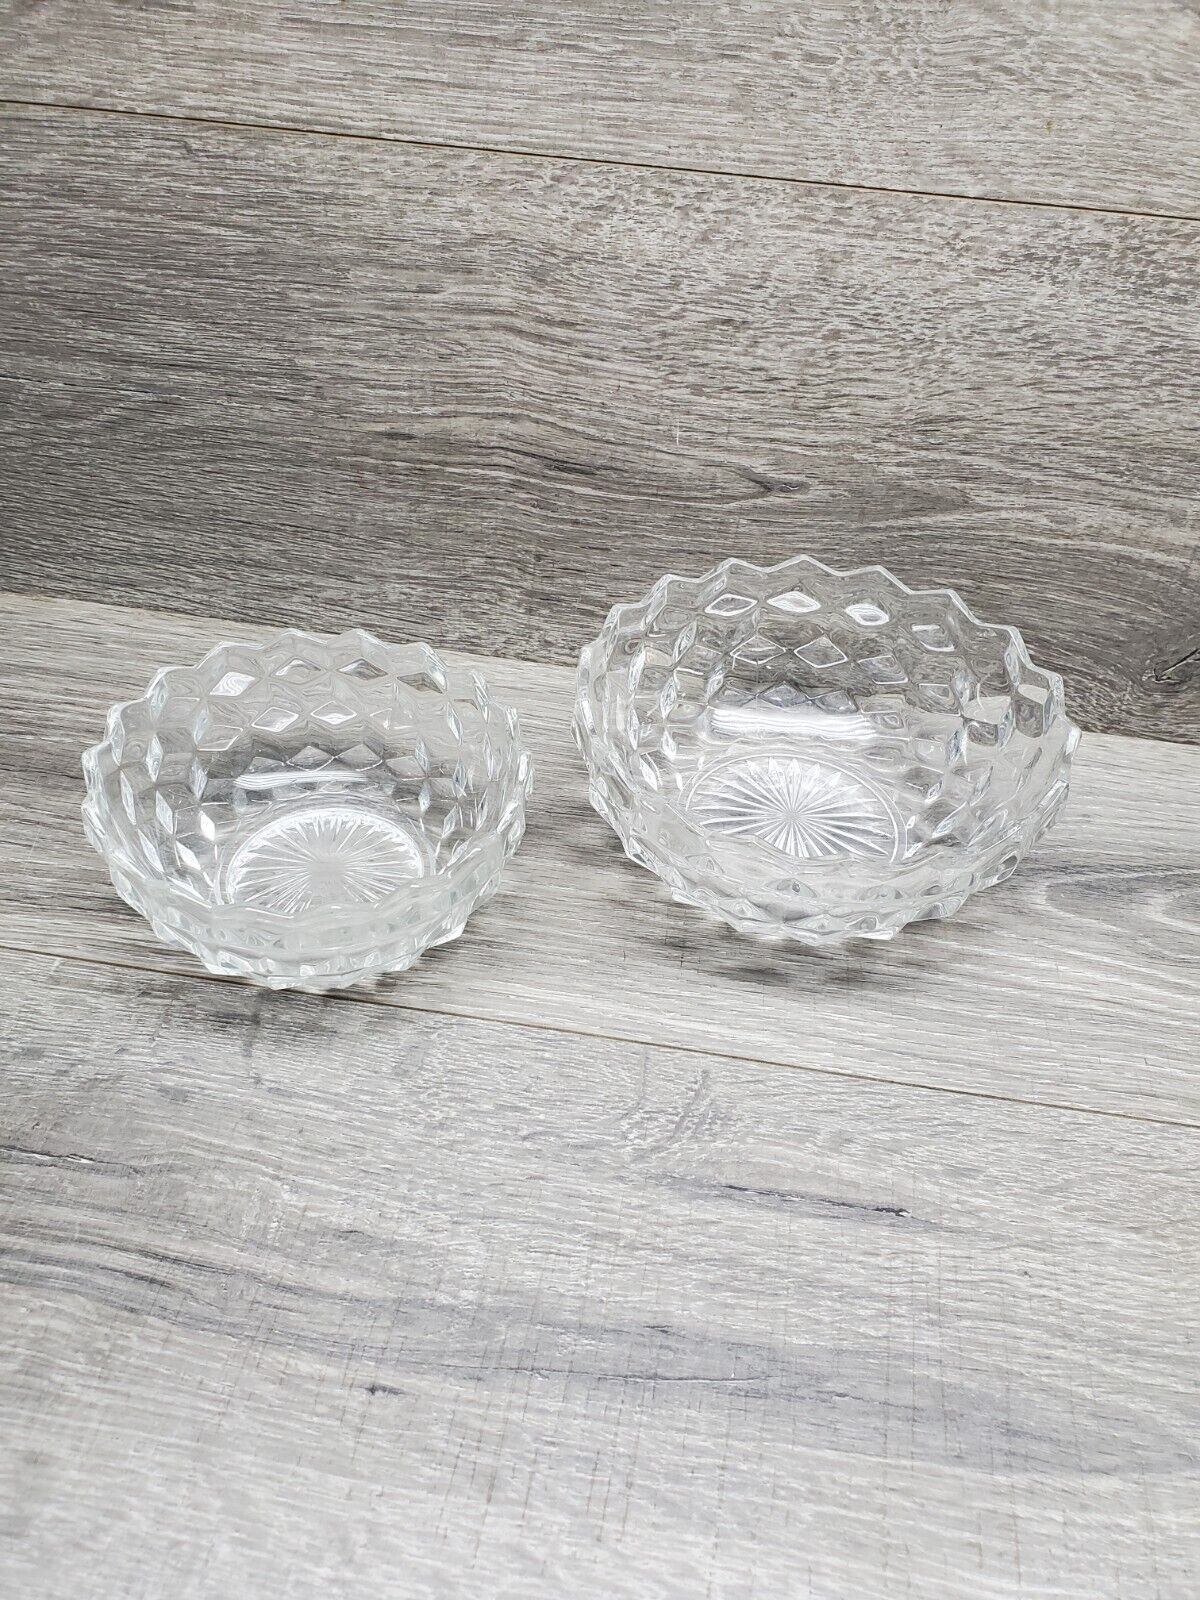 Set of 2 Vintage American Fostoria Crystal Clear Glass Bowls 